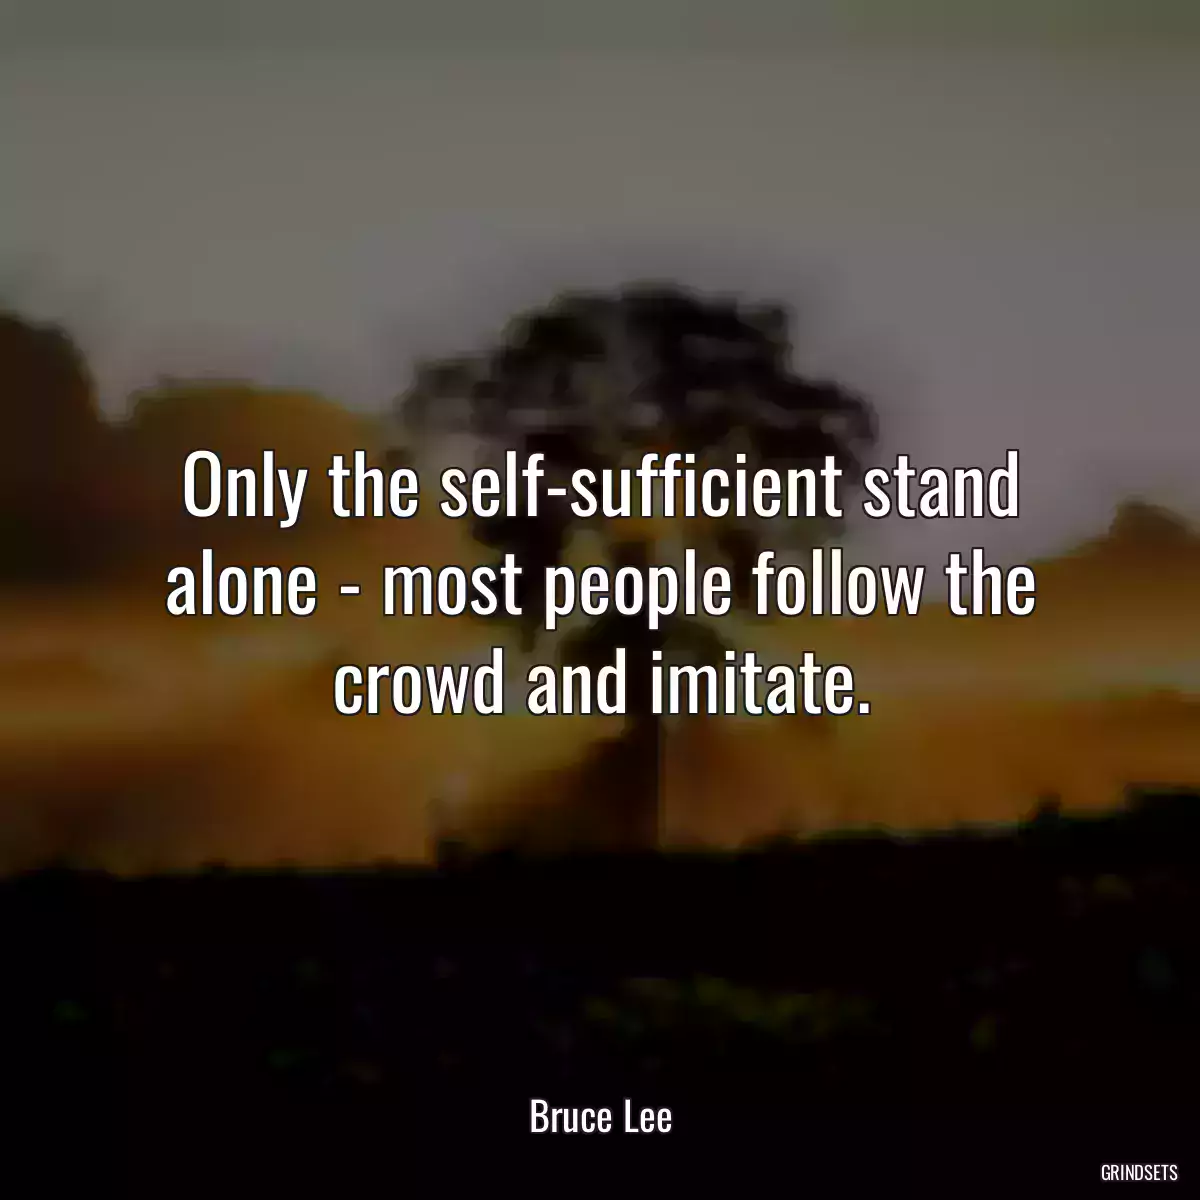 Only the self-sufficient stand alone - most people follow the crowd and imitate.